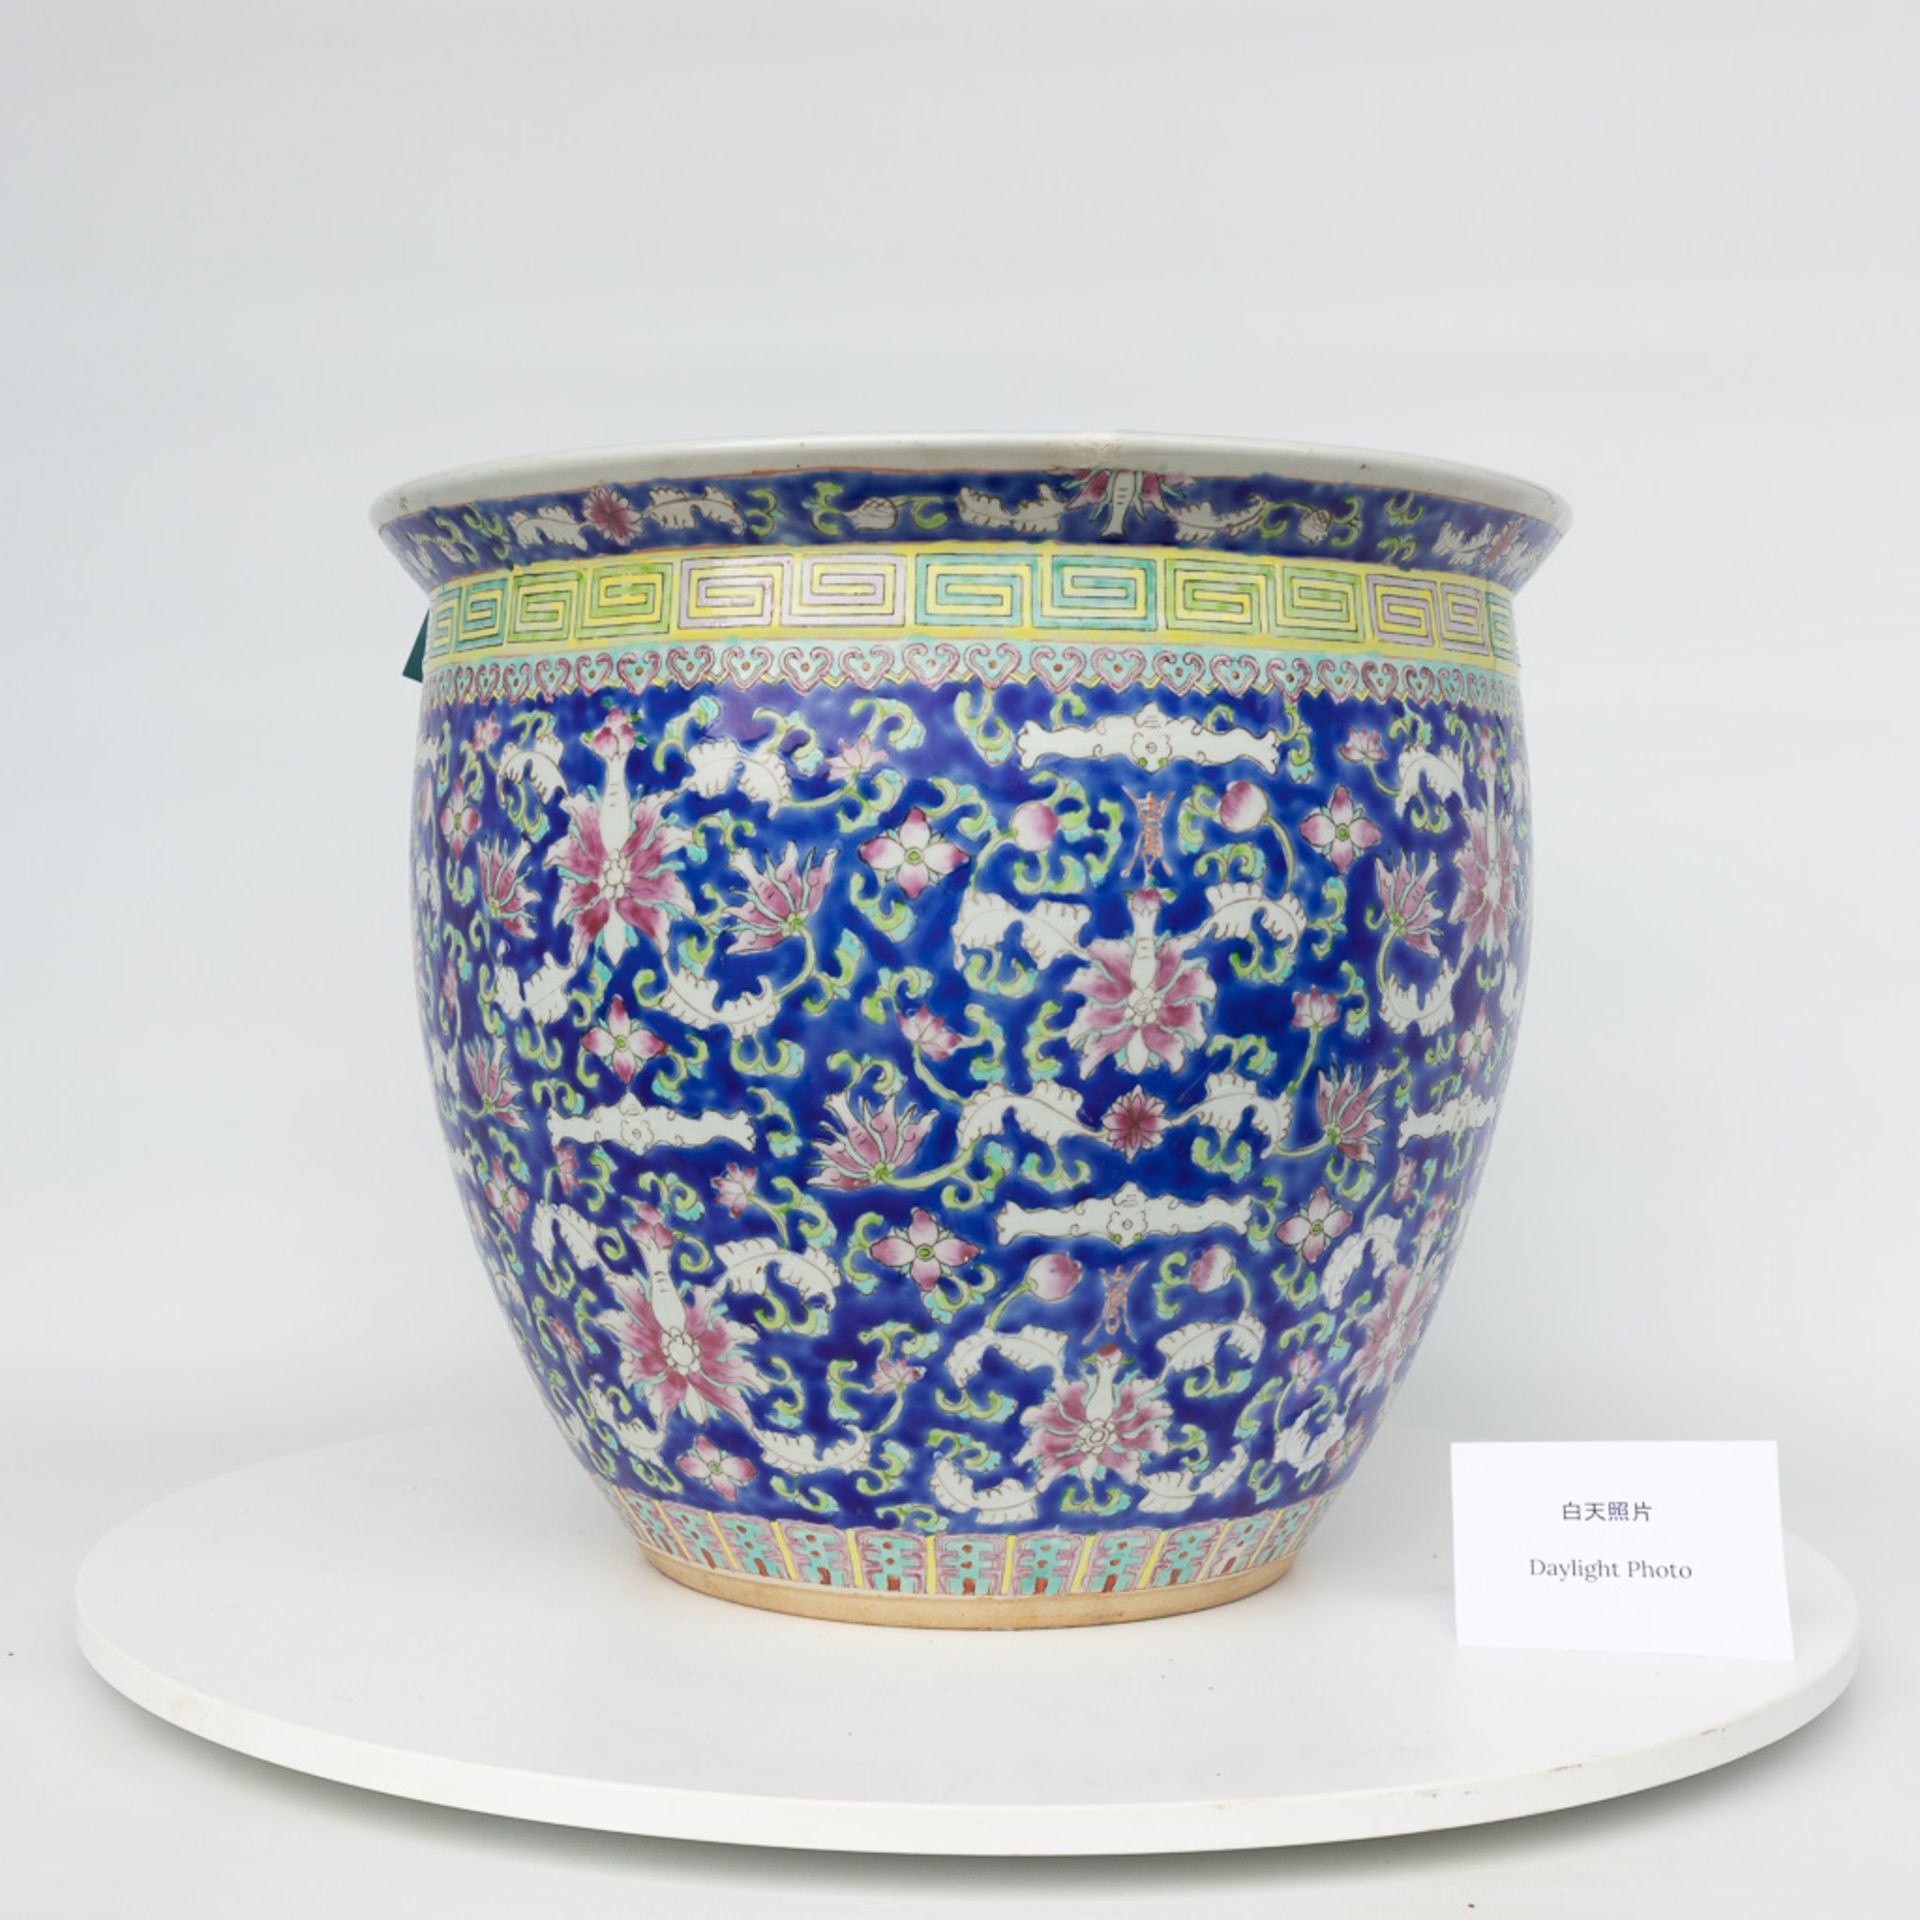 A large cache-pot made of Chinese porcelain and decorated with flowers - Image 10 of 10